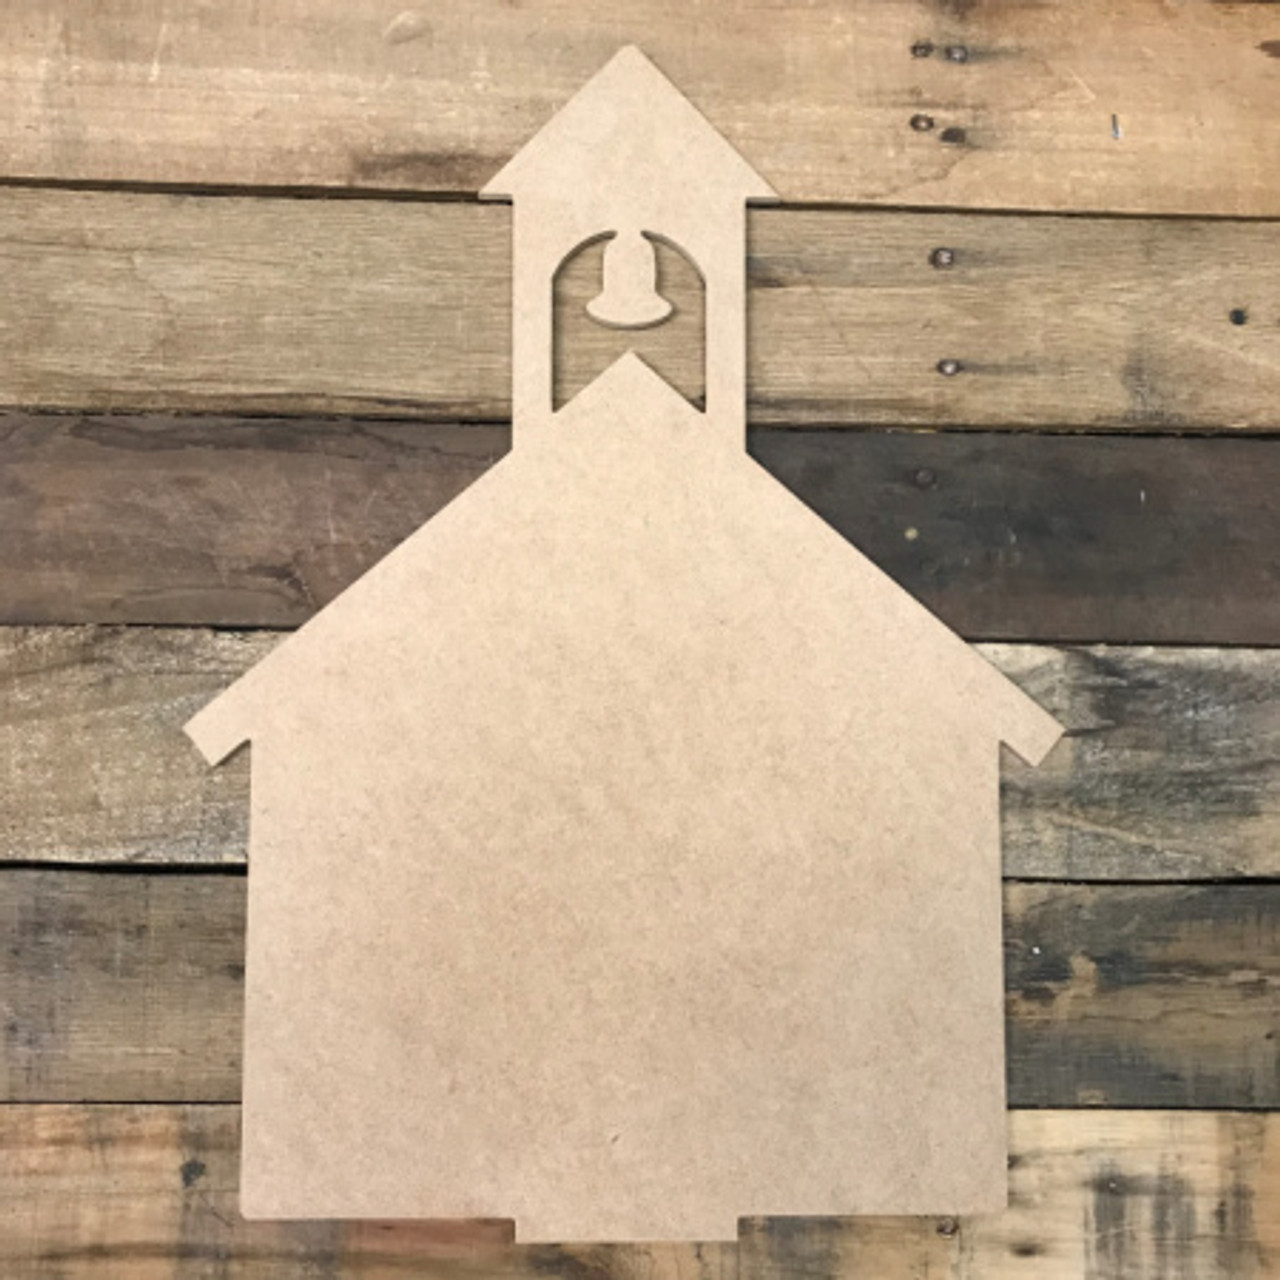 Unfinished Wood Cutout - 6-Pack Cross Shaped Wood Pieces for Wooden Craft  DIY Projects, Sunday School, Church, Home Decoration, 11.8 x 8.8 x 0.188  inches